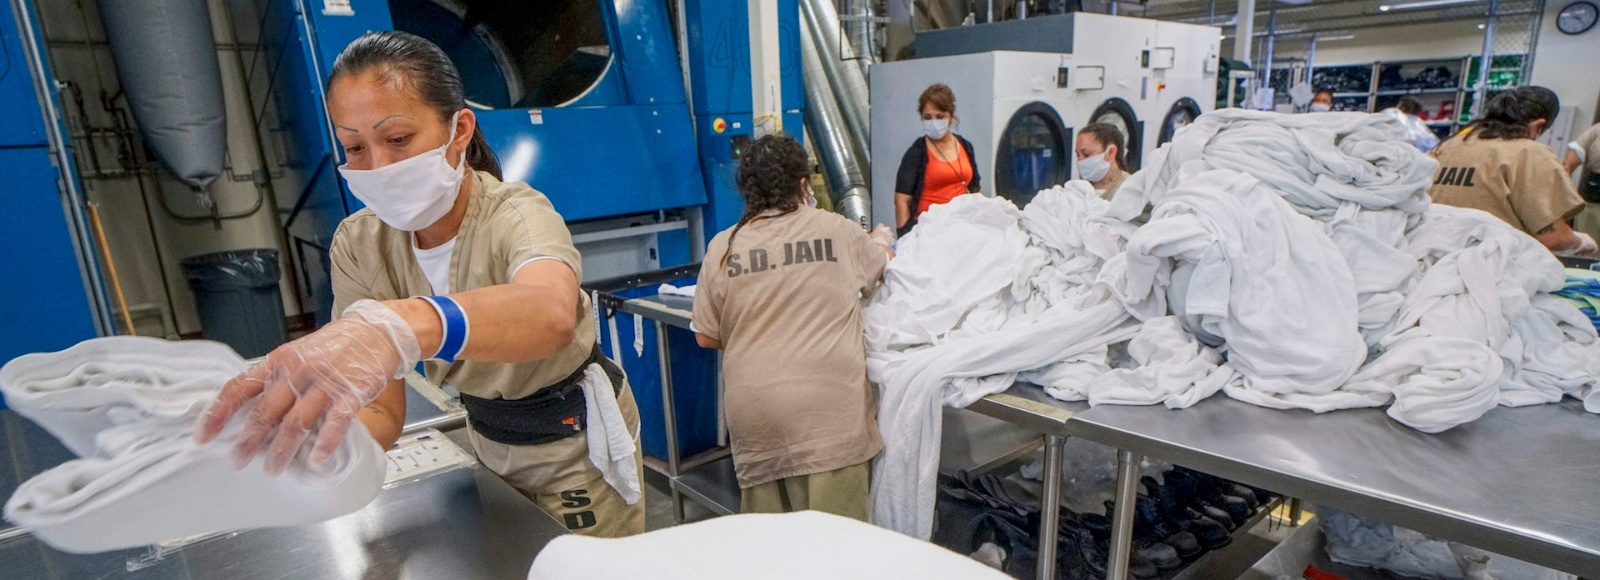 Female prison workers doing laundry